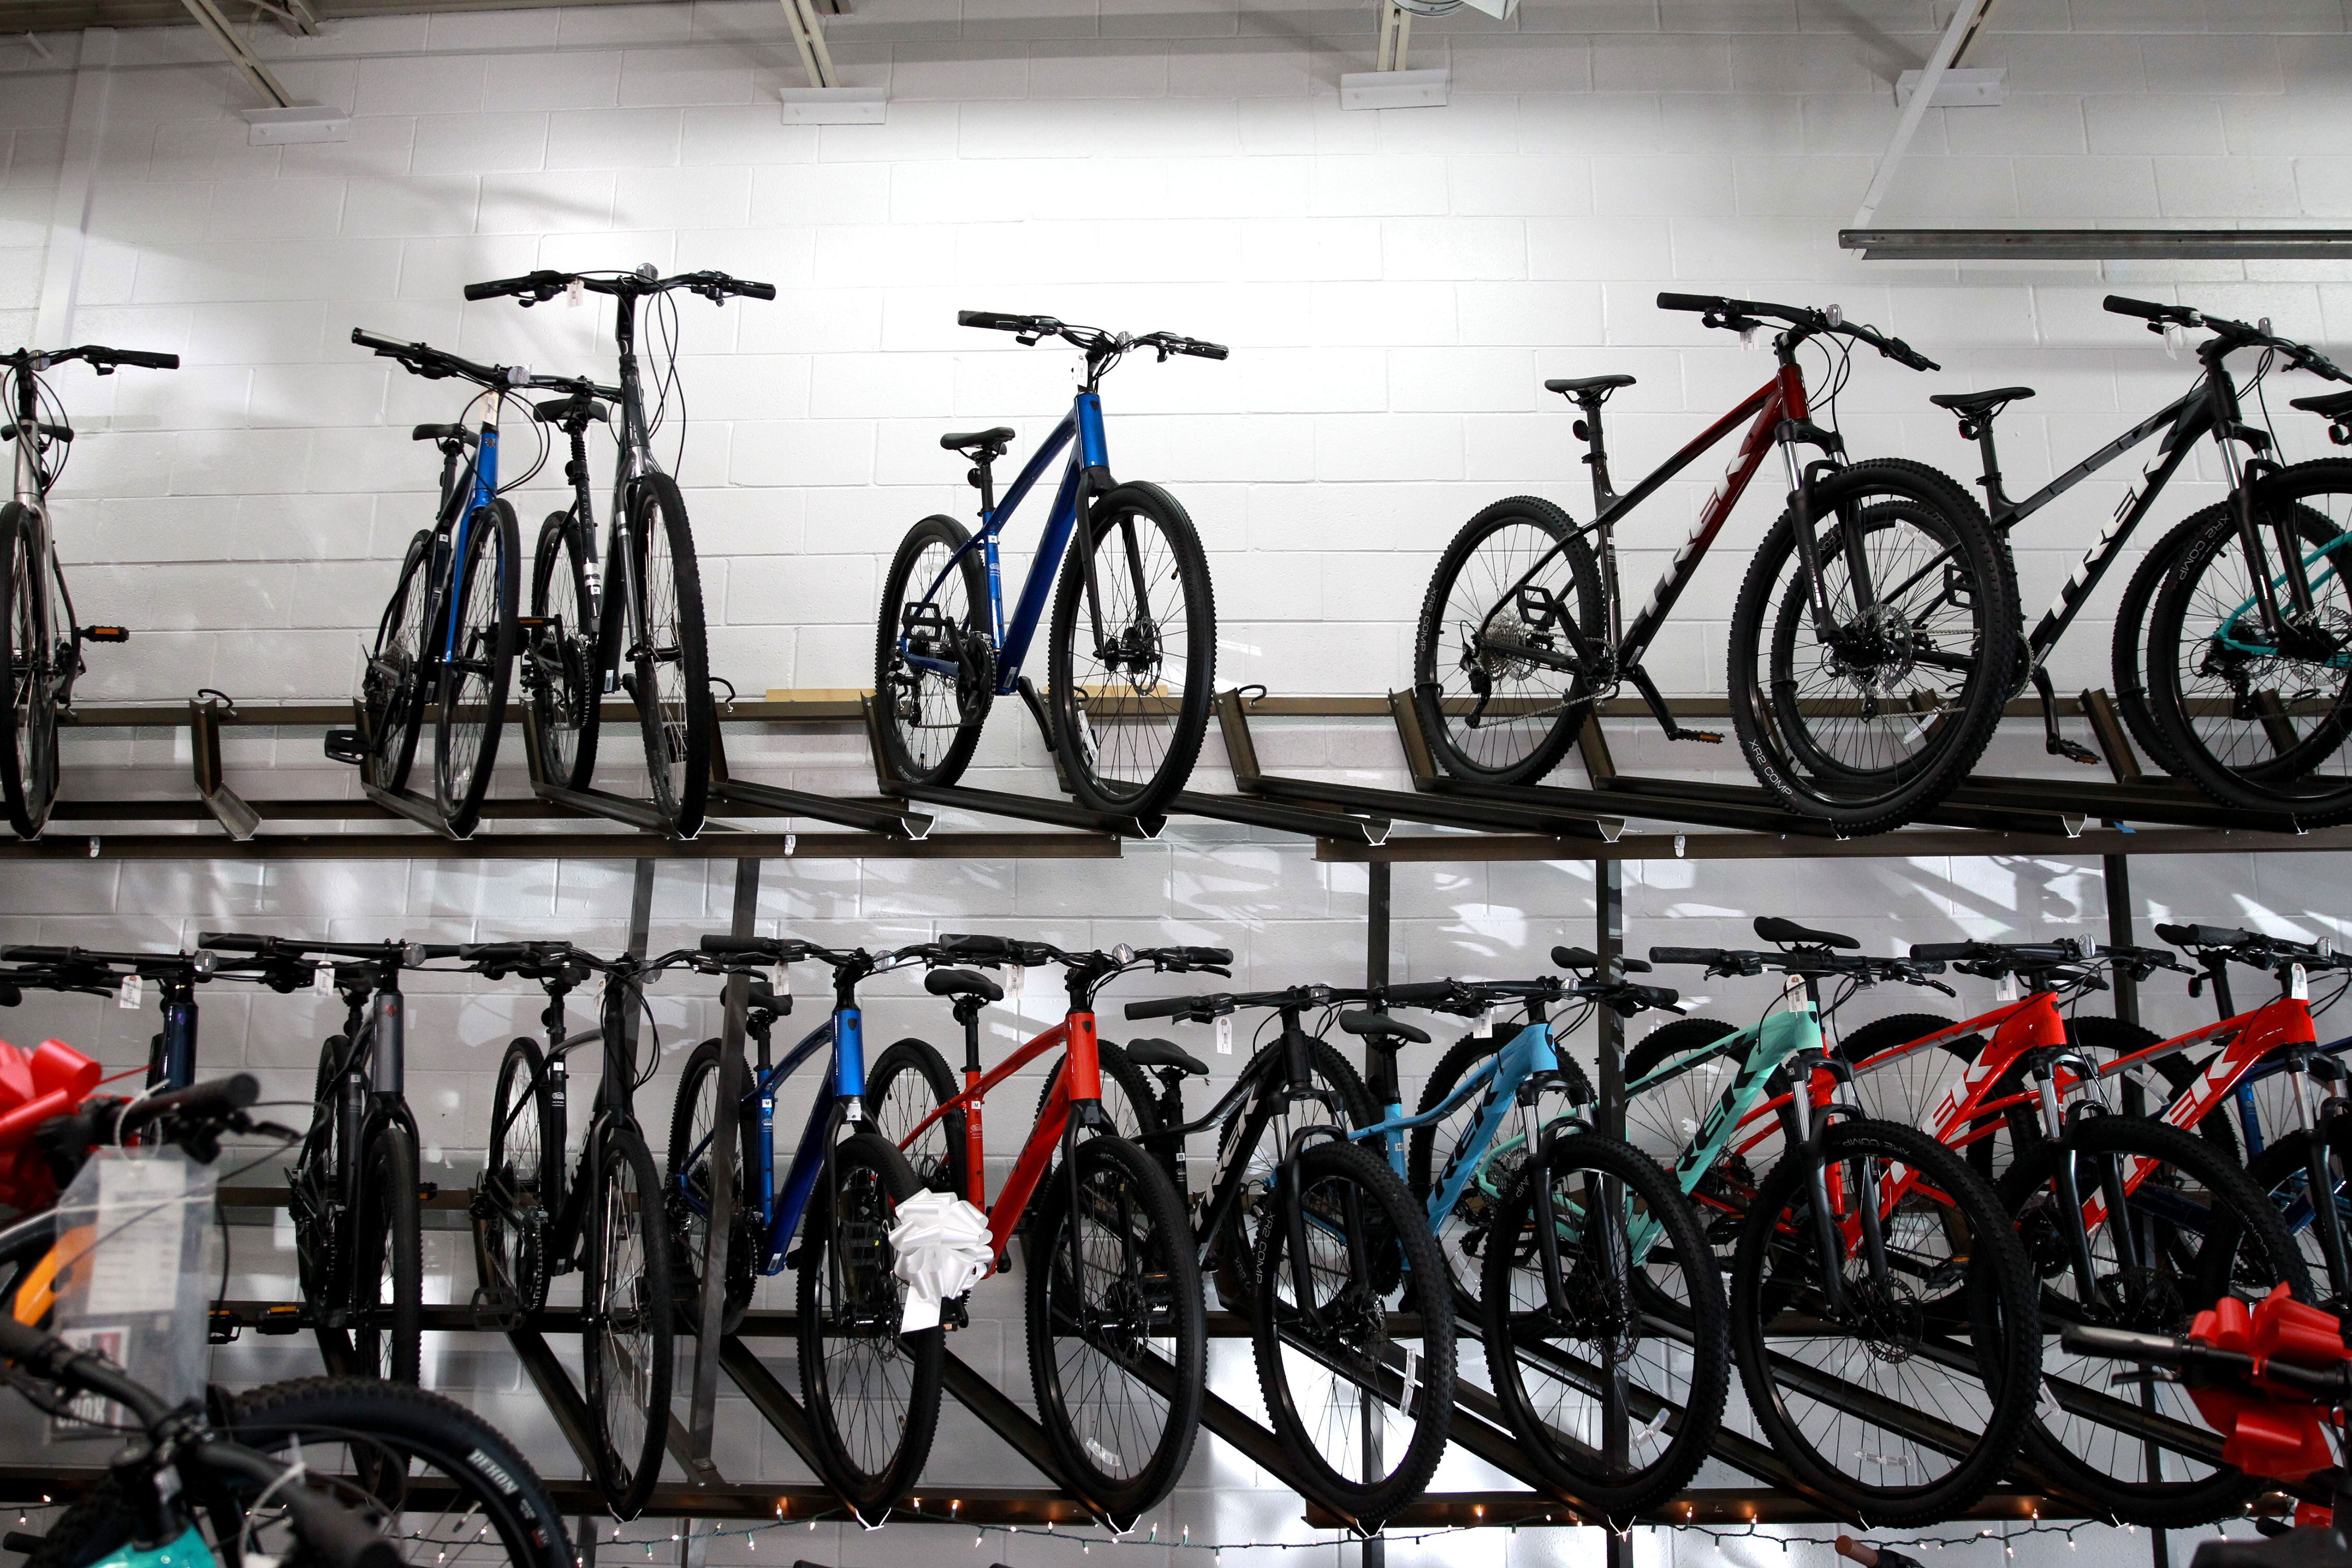 St. Charles-based The Bike Rack, owned by the Honeyman family, recently acquired Oswego Cyclery, which had been in business since 2004.